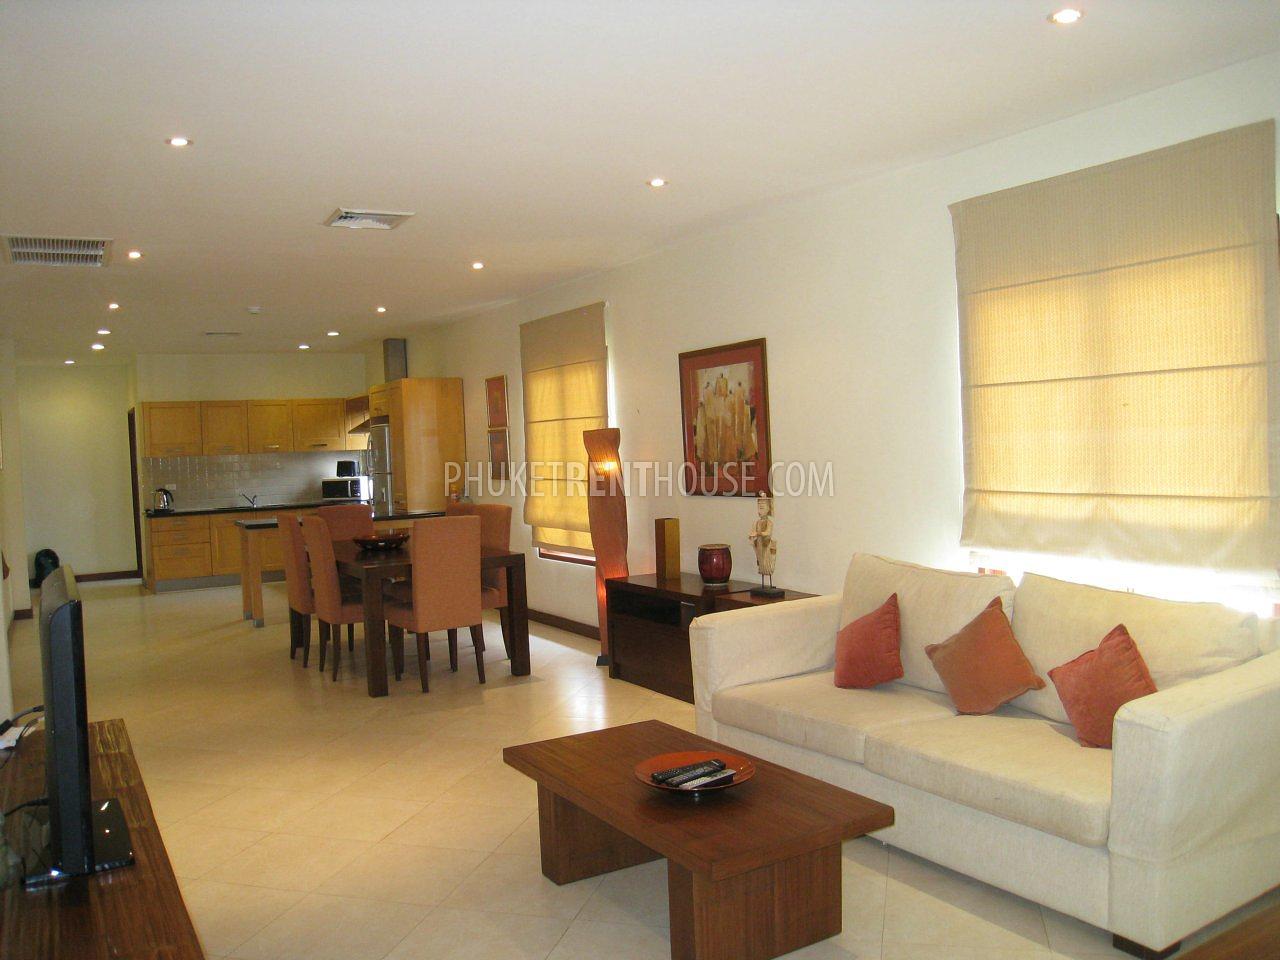 BAN19117: Stunning 2 Bedroom Apartment with Amazing Facilities. Photo #1